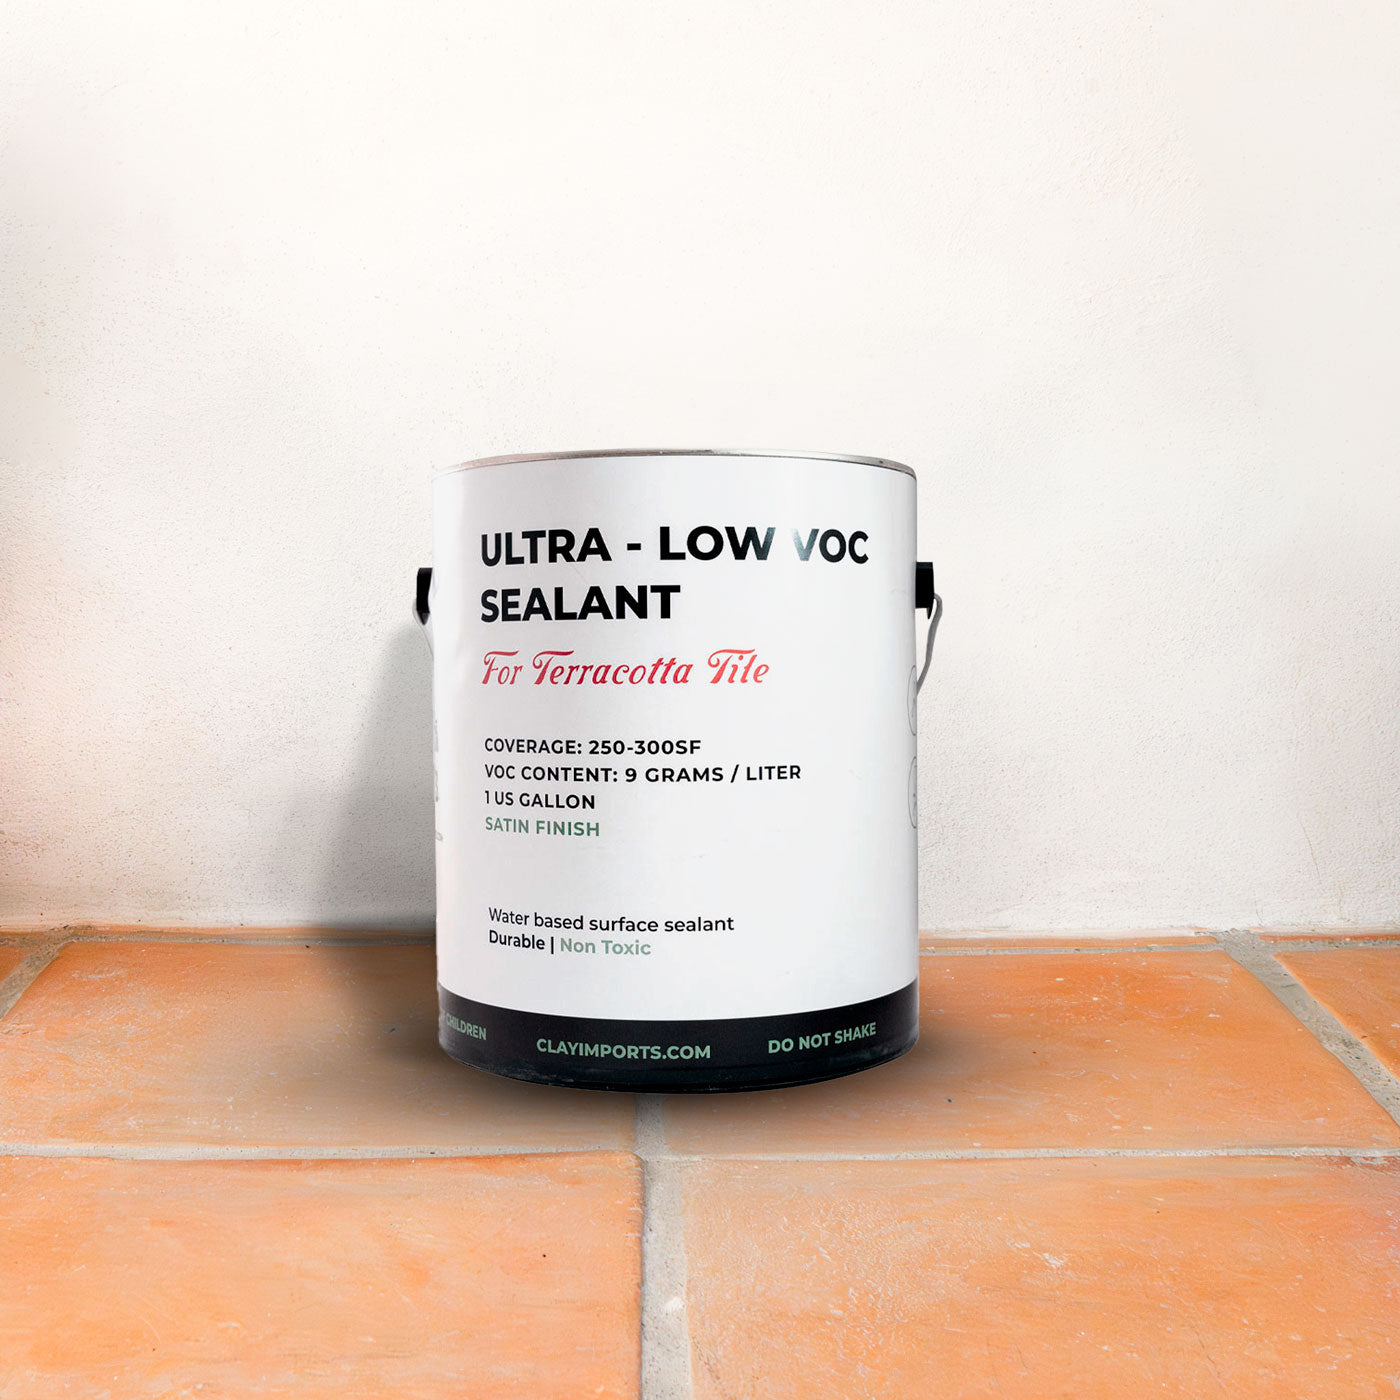 Ultra Low VOC Tile sealant by Clay Imports